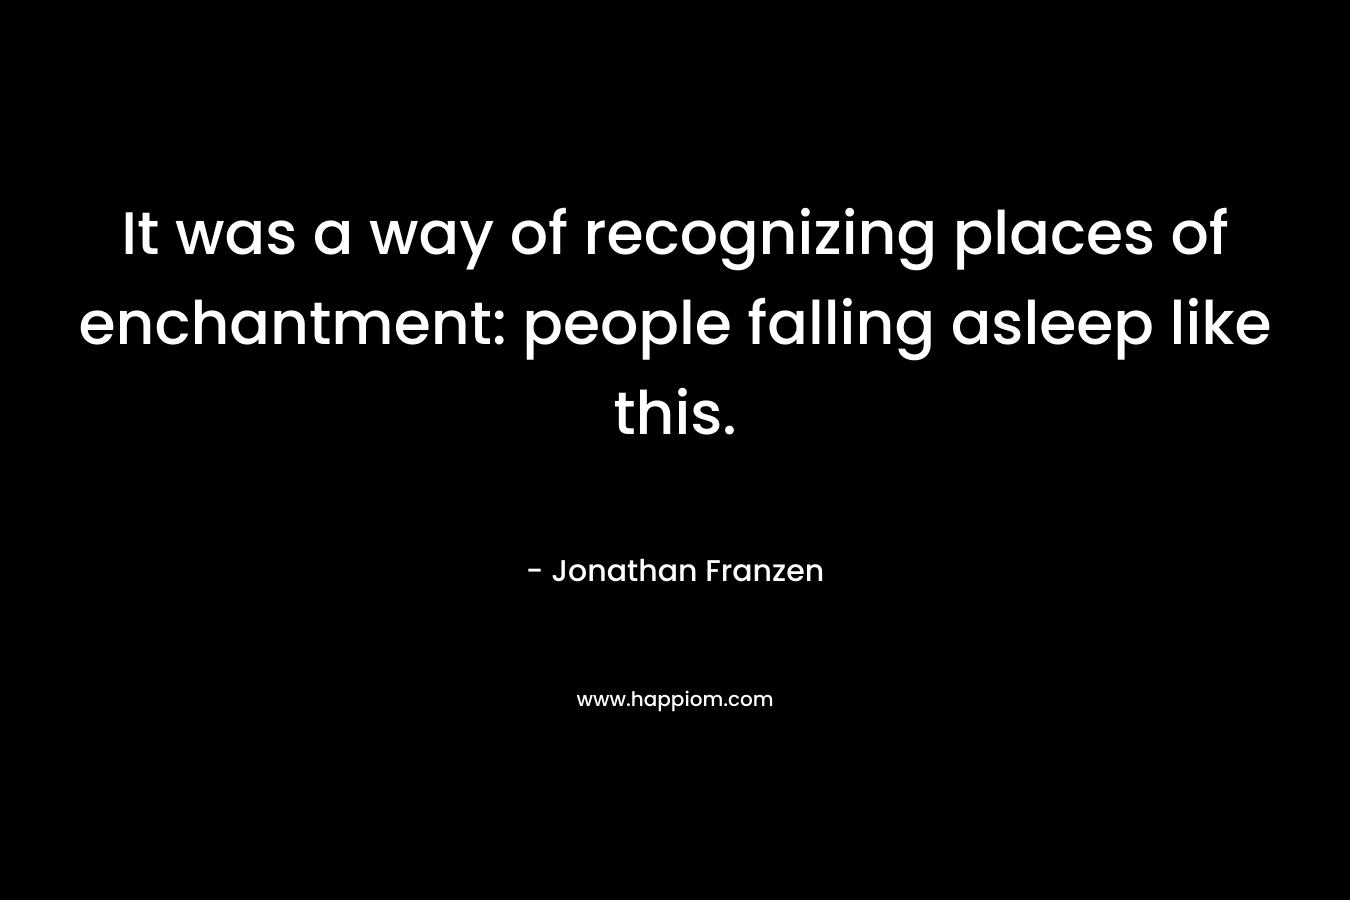 It was a way of recognizing places of enchantment: people falling asleep like this. – Jonathan Franzen